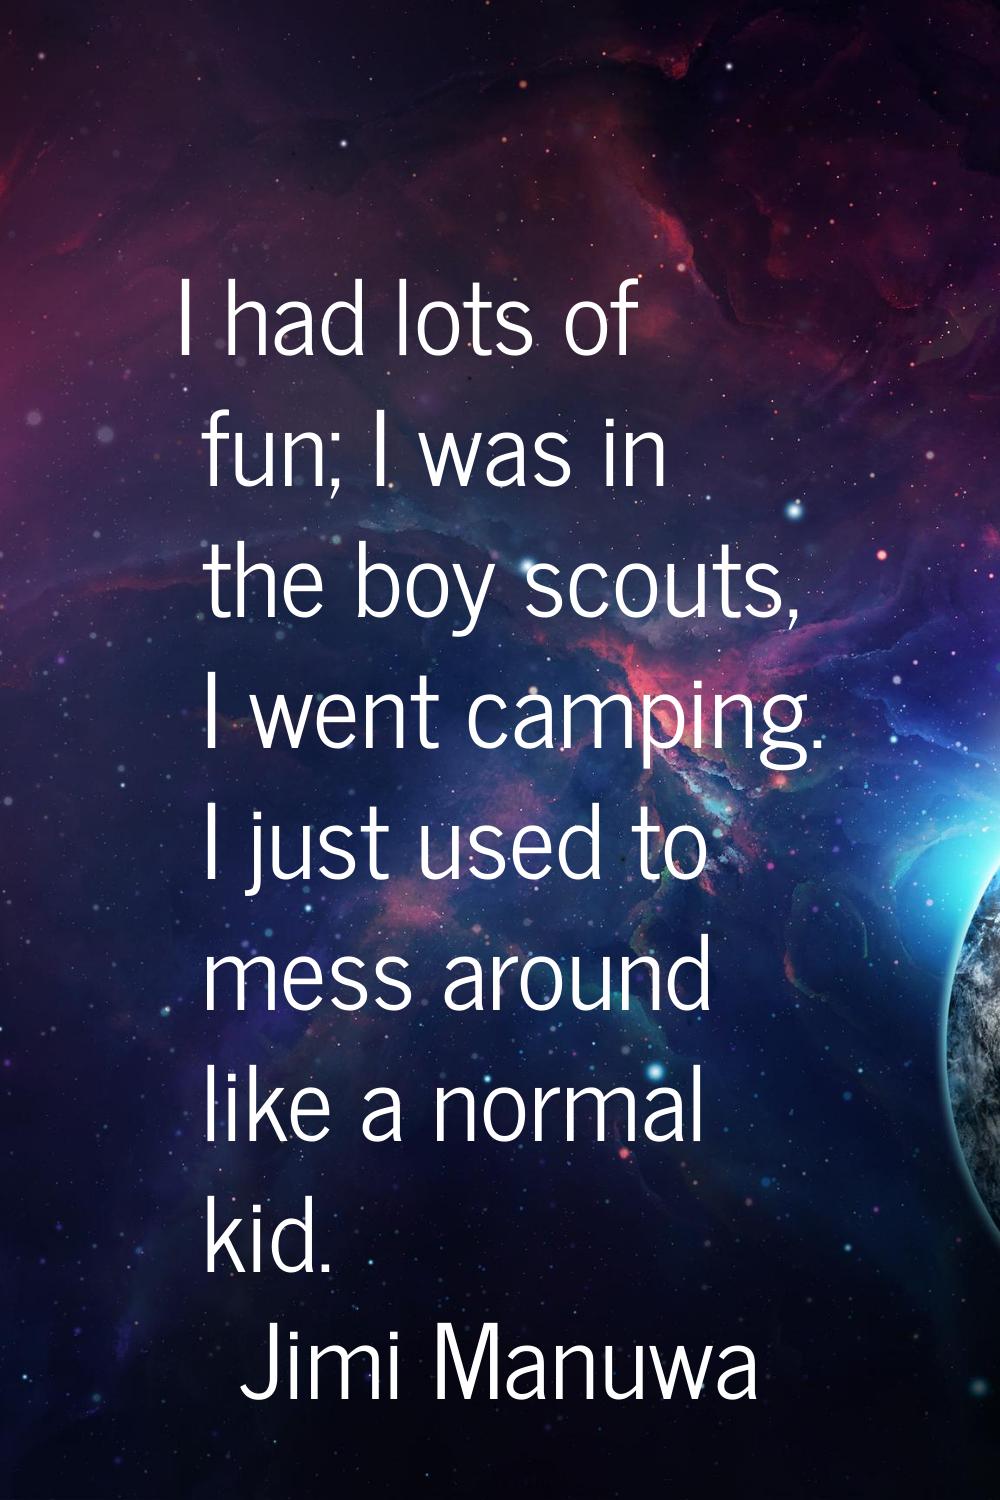 I had lots of fun; I was in the boy scouts, I went camping. I just used to mess around like a norma